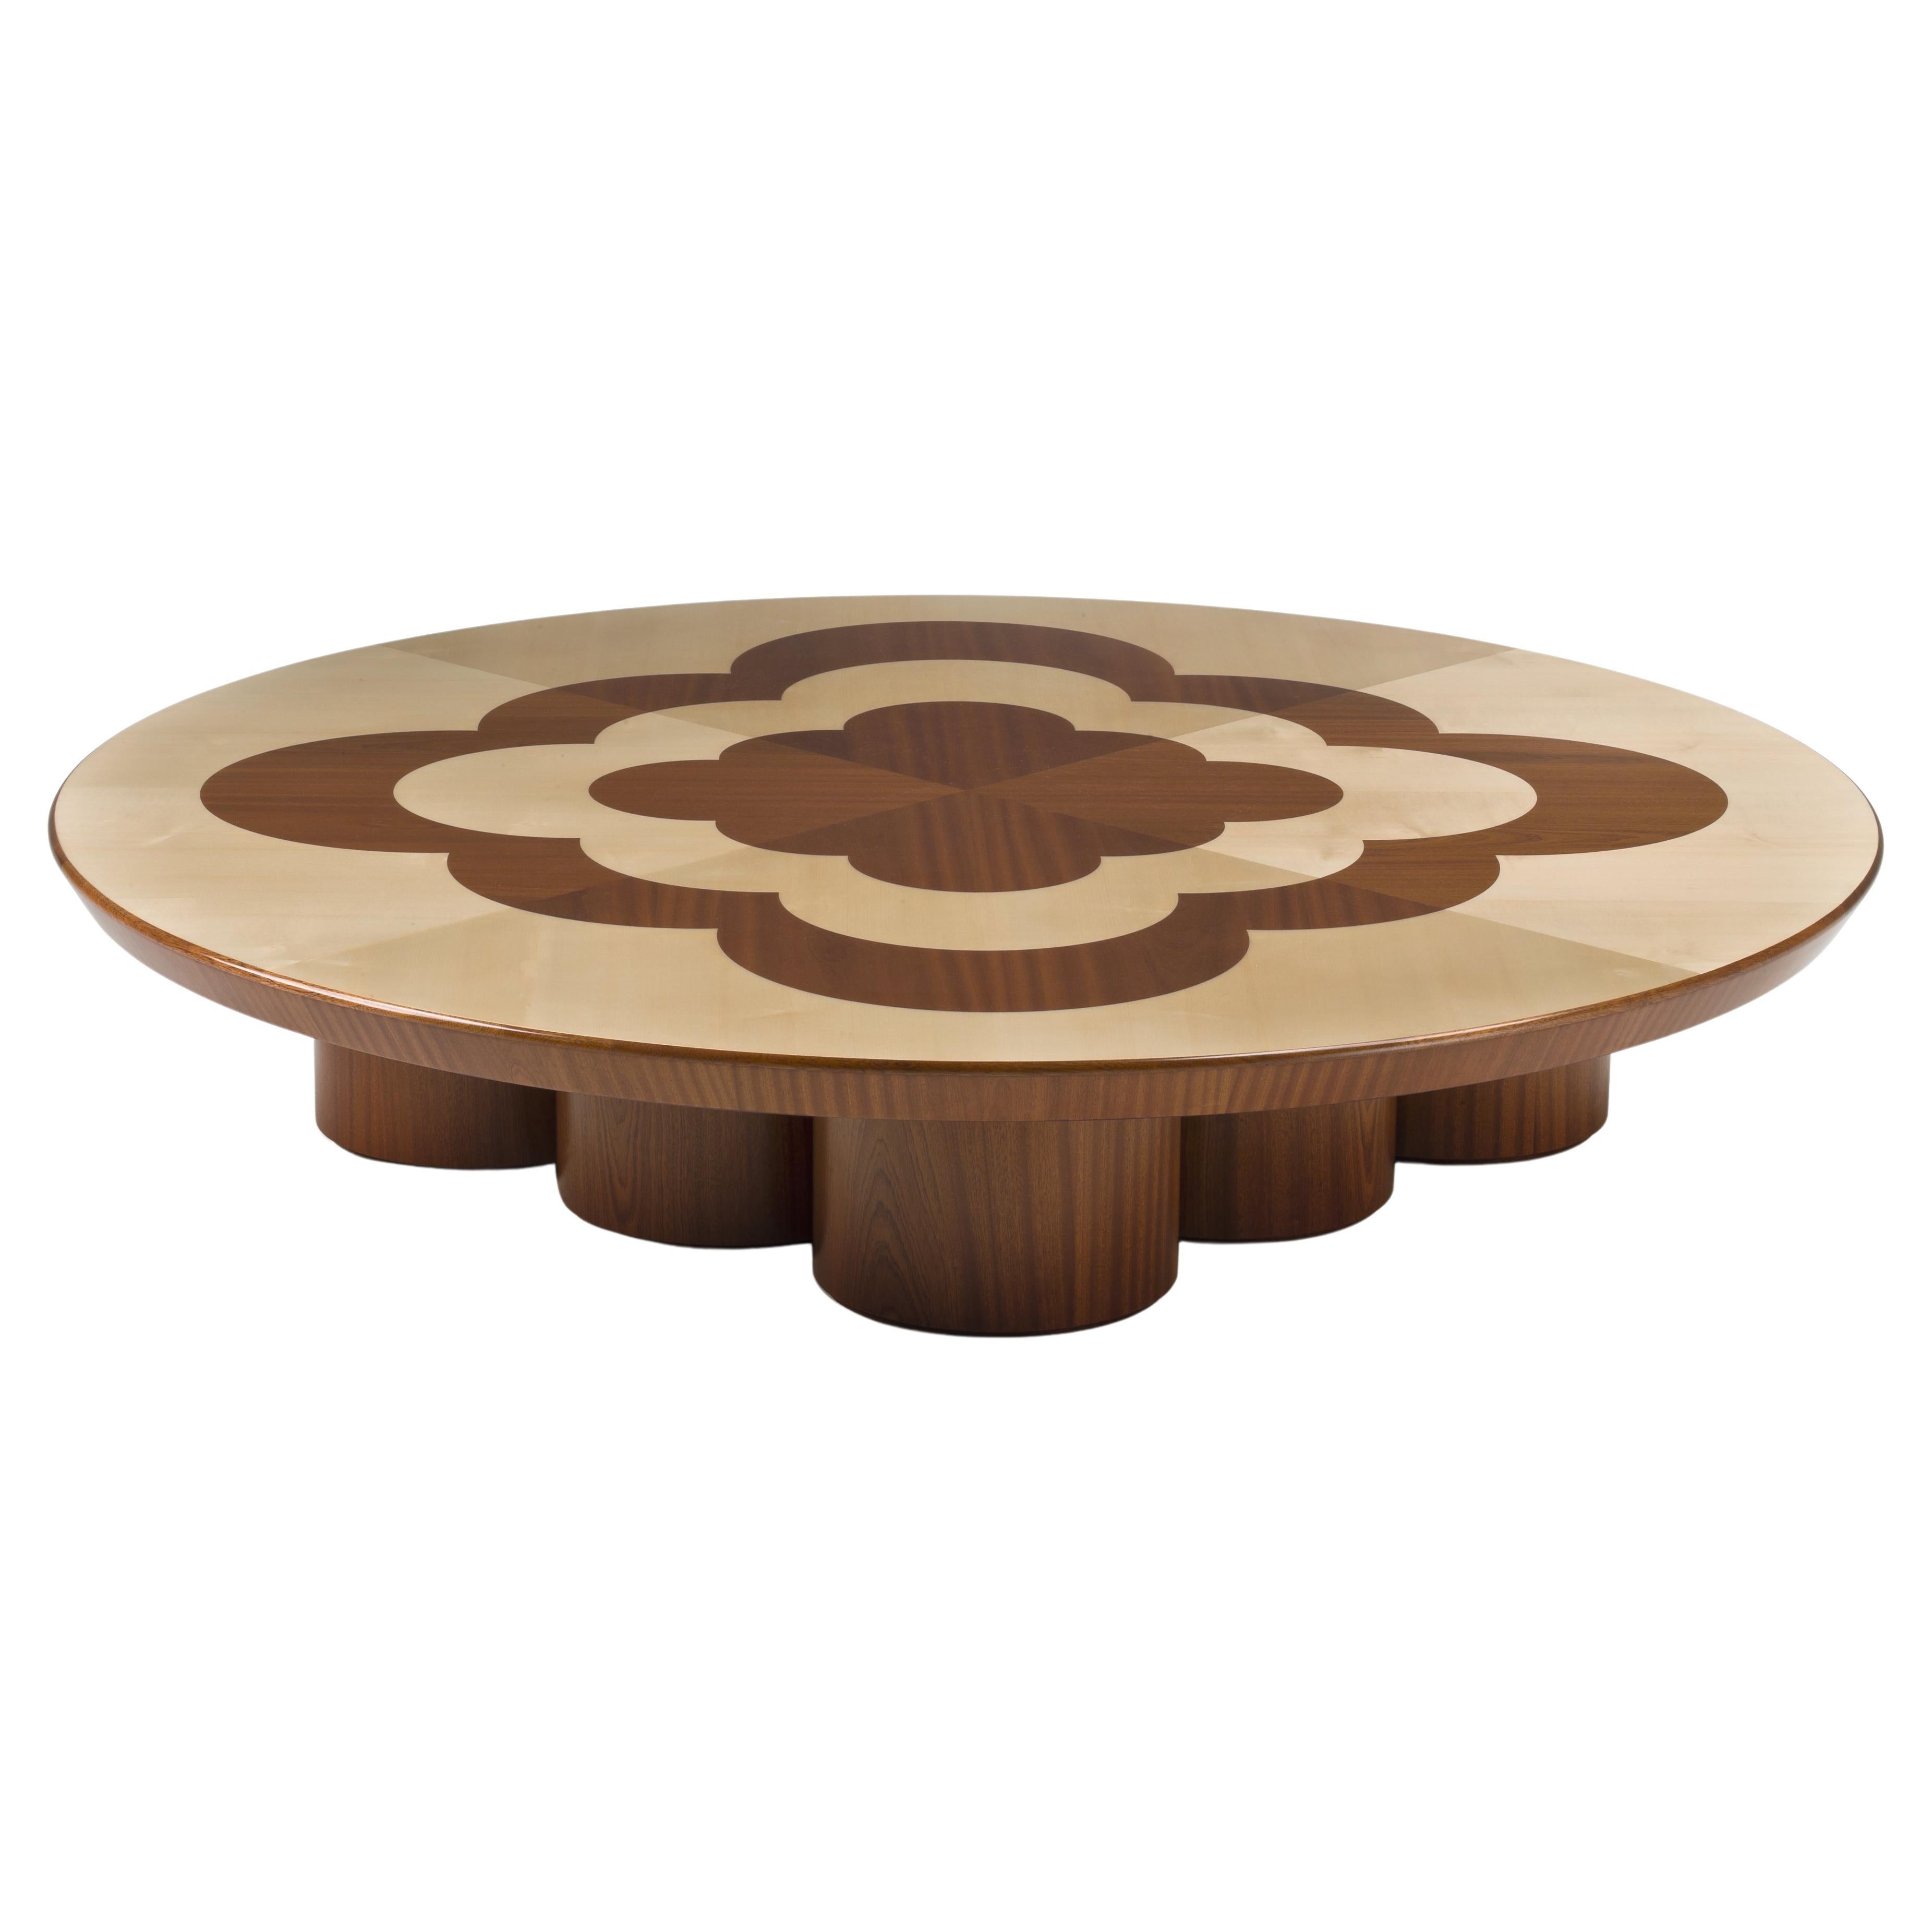 ARCHWAY CT Inlay Round Cocktail Table with Flower in Mahogany and Maple wood For Sale